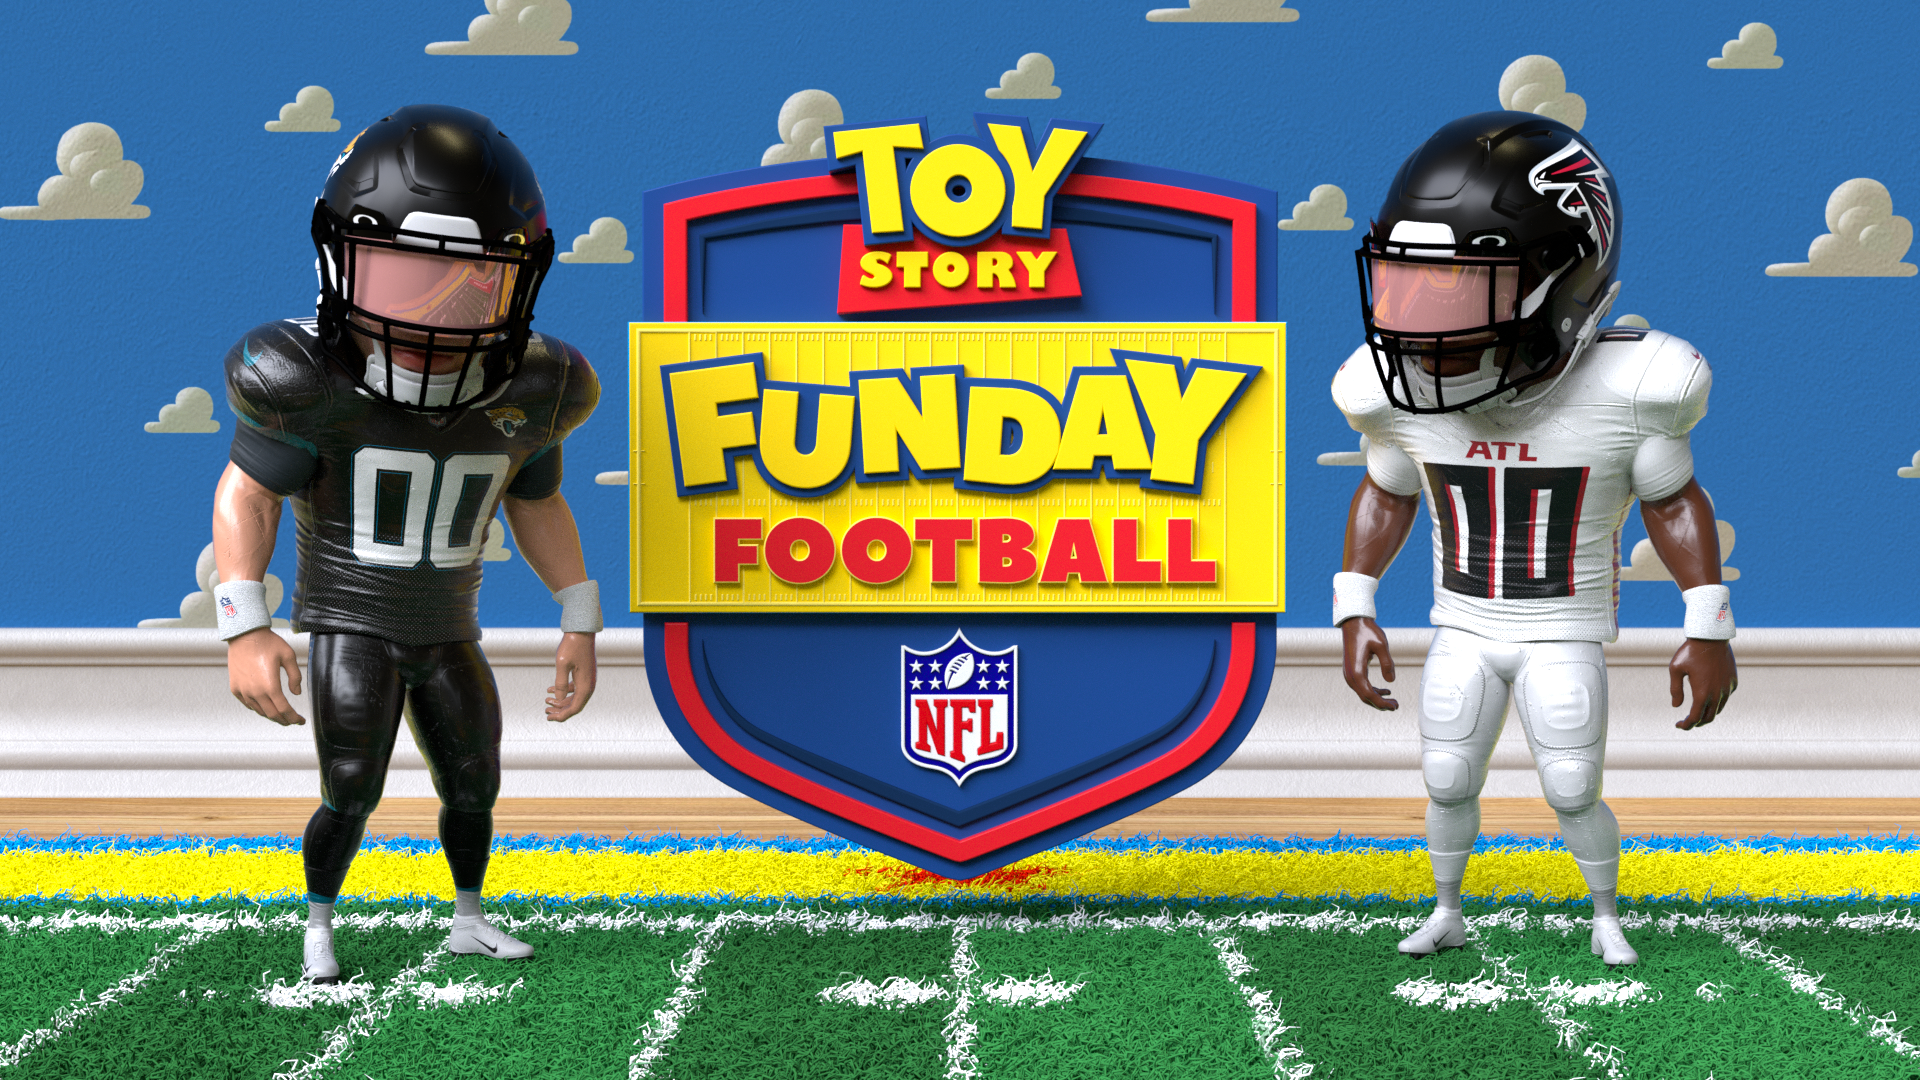 Toy Story Funday Football: NFL Action Meets Animated Magic